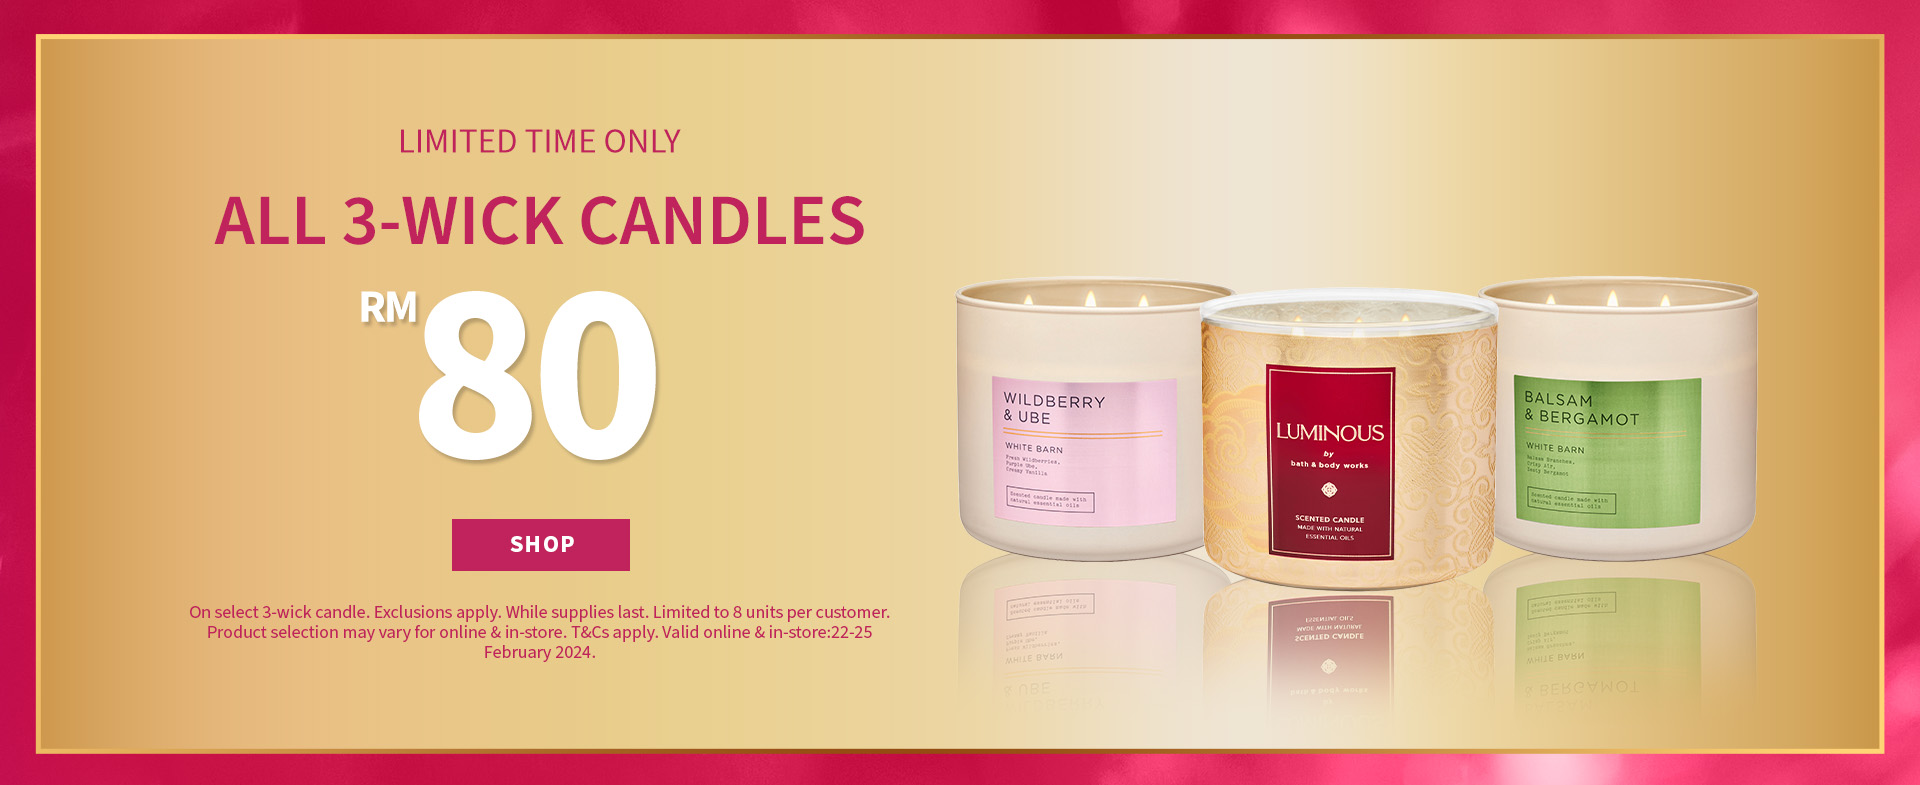 LIMITED TIME ONLY ALL 3-WICK CANDLES